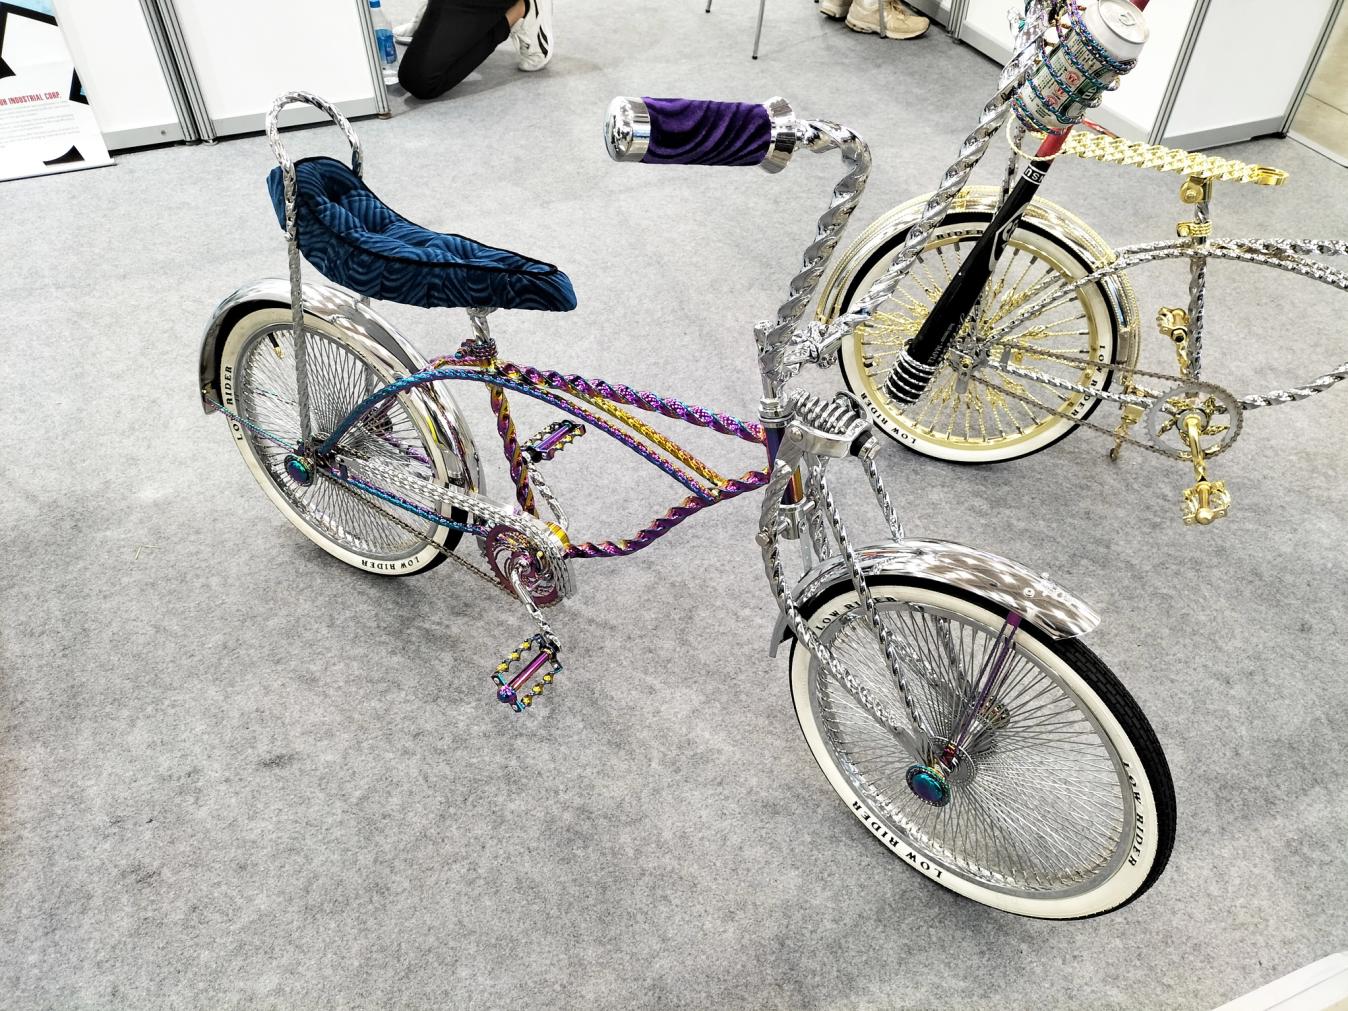 Multiple versions were on show of what must have been the most blinged-out bike at the Taipei Cycle Show in 2024